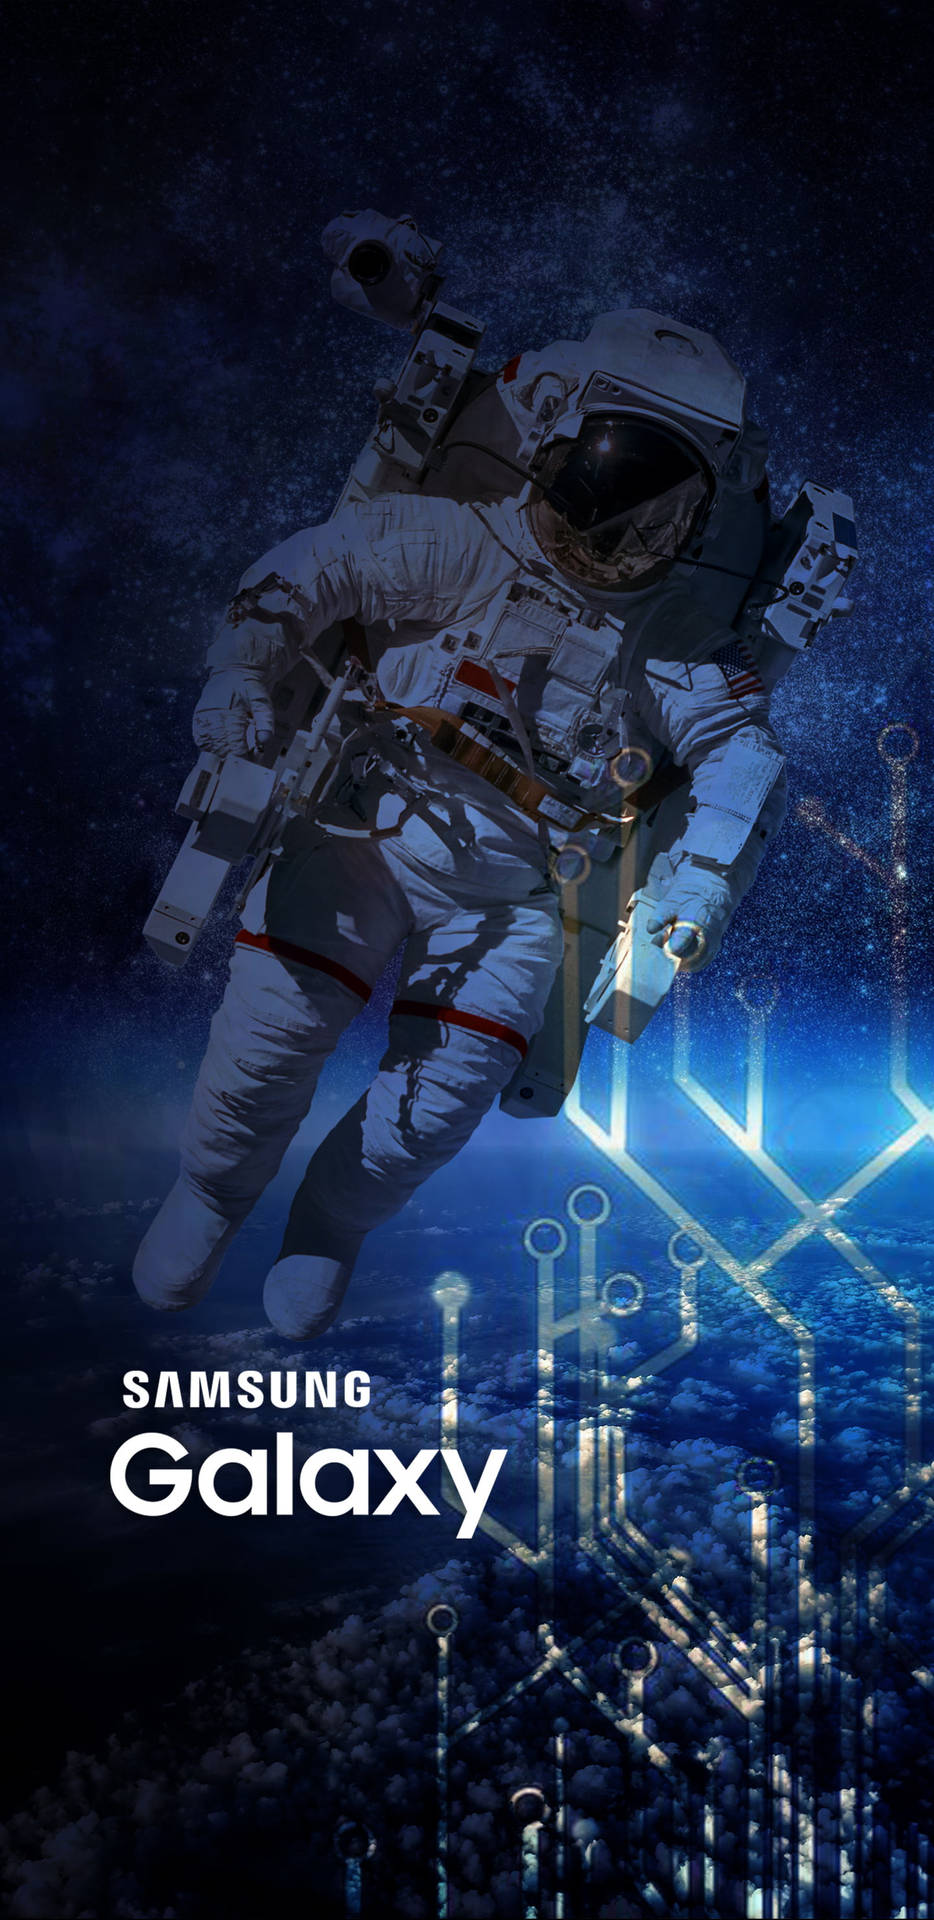 Samsung Galaxy Astronaut In Space Picture